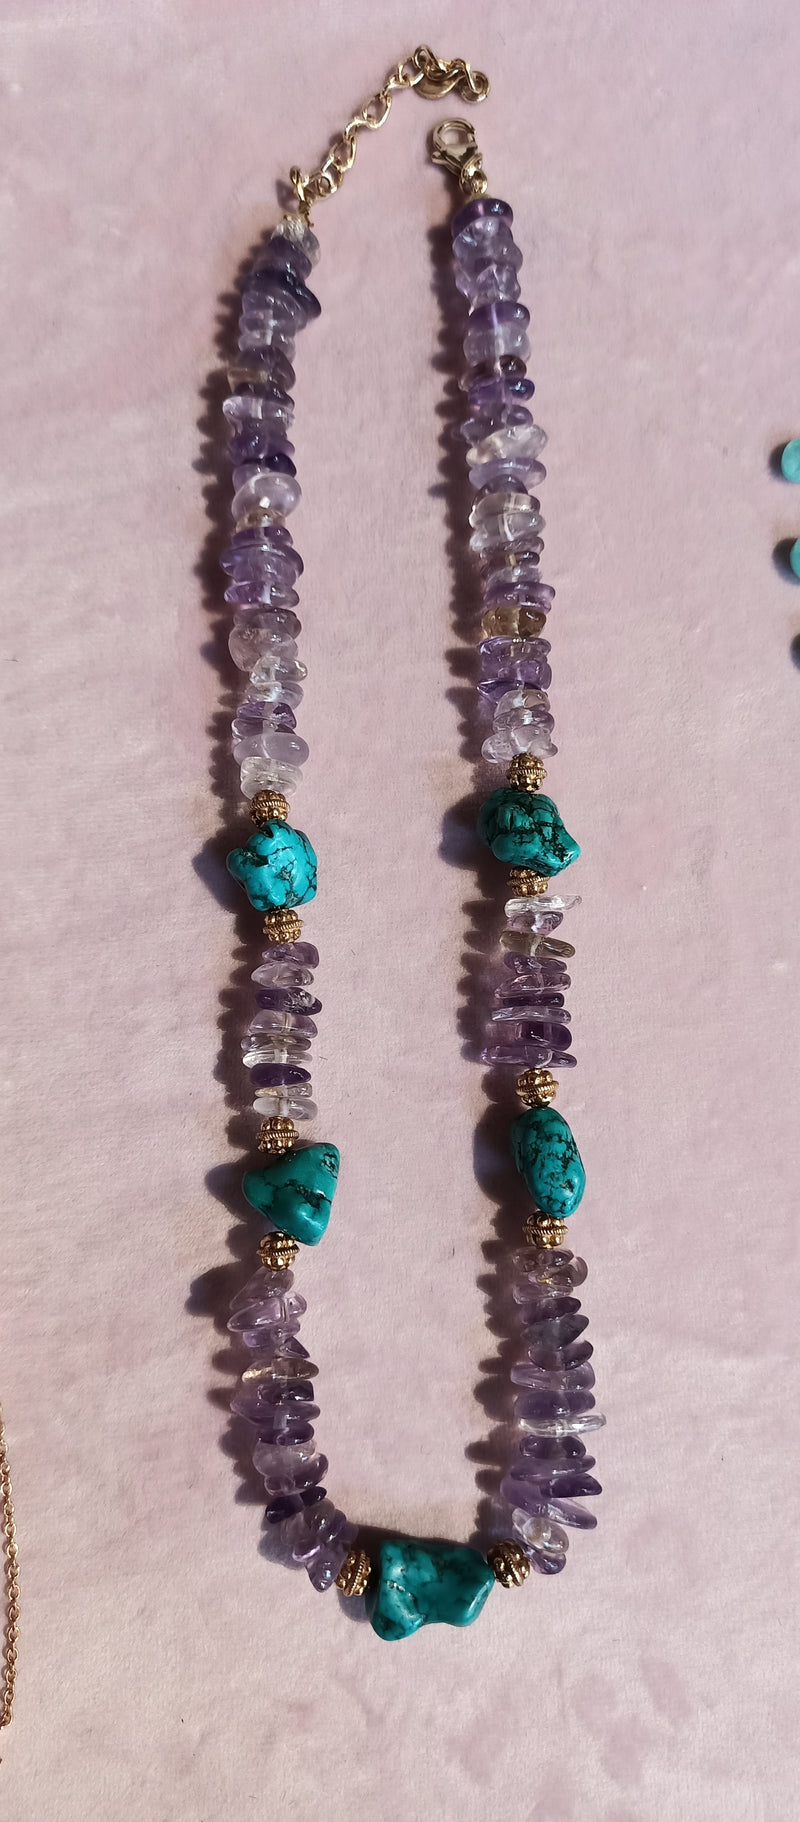 Amethyst and Turquoise necklace